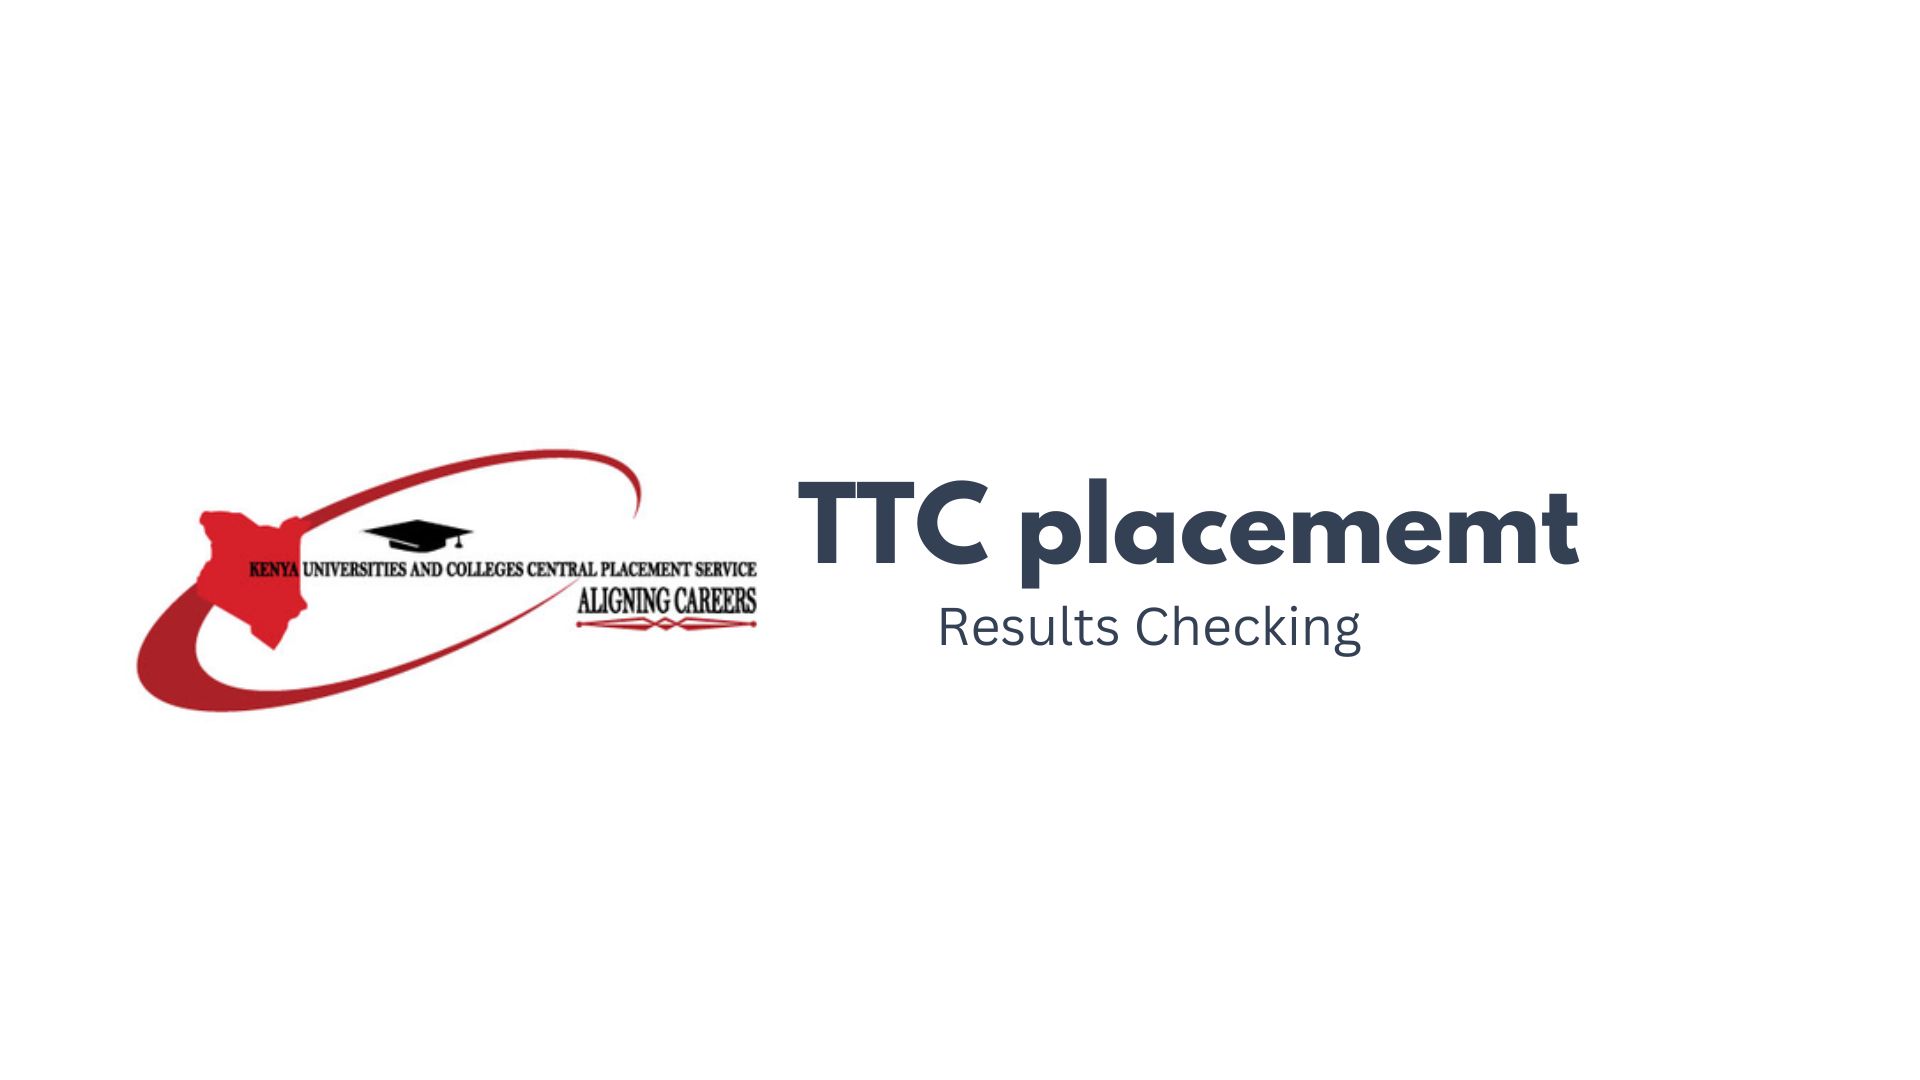 How to check KUCCPS TTC placement results